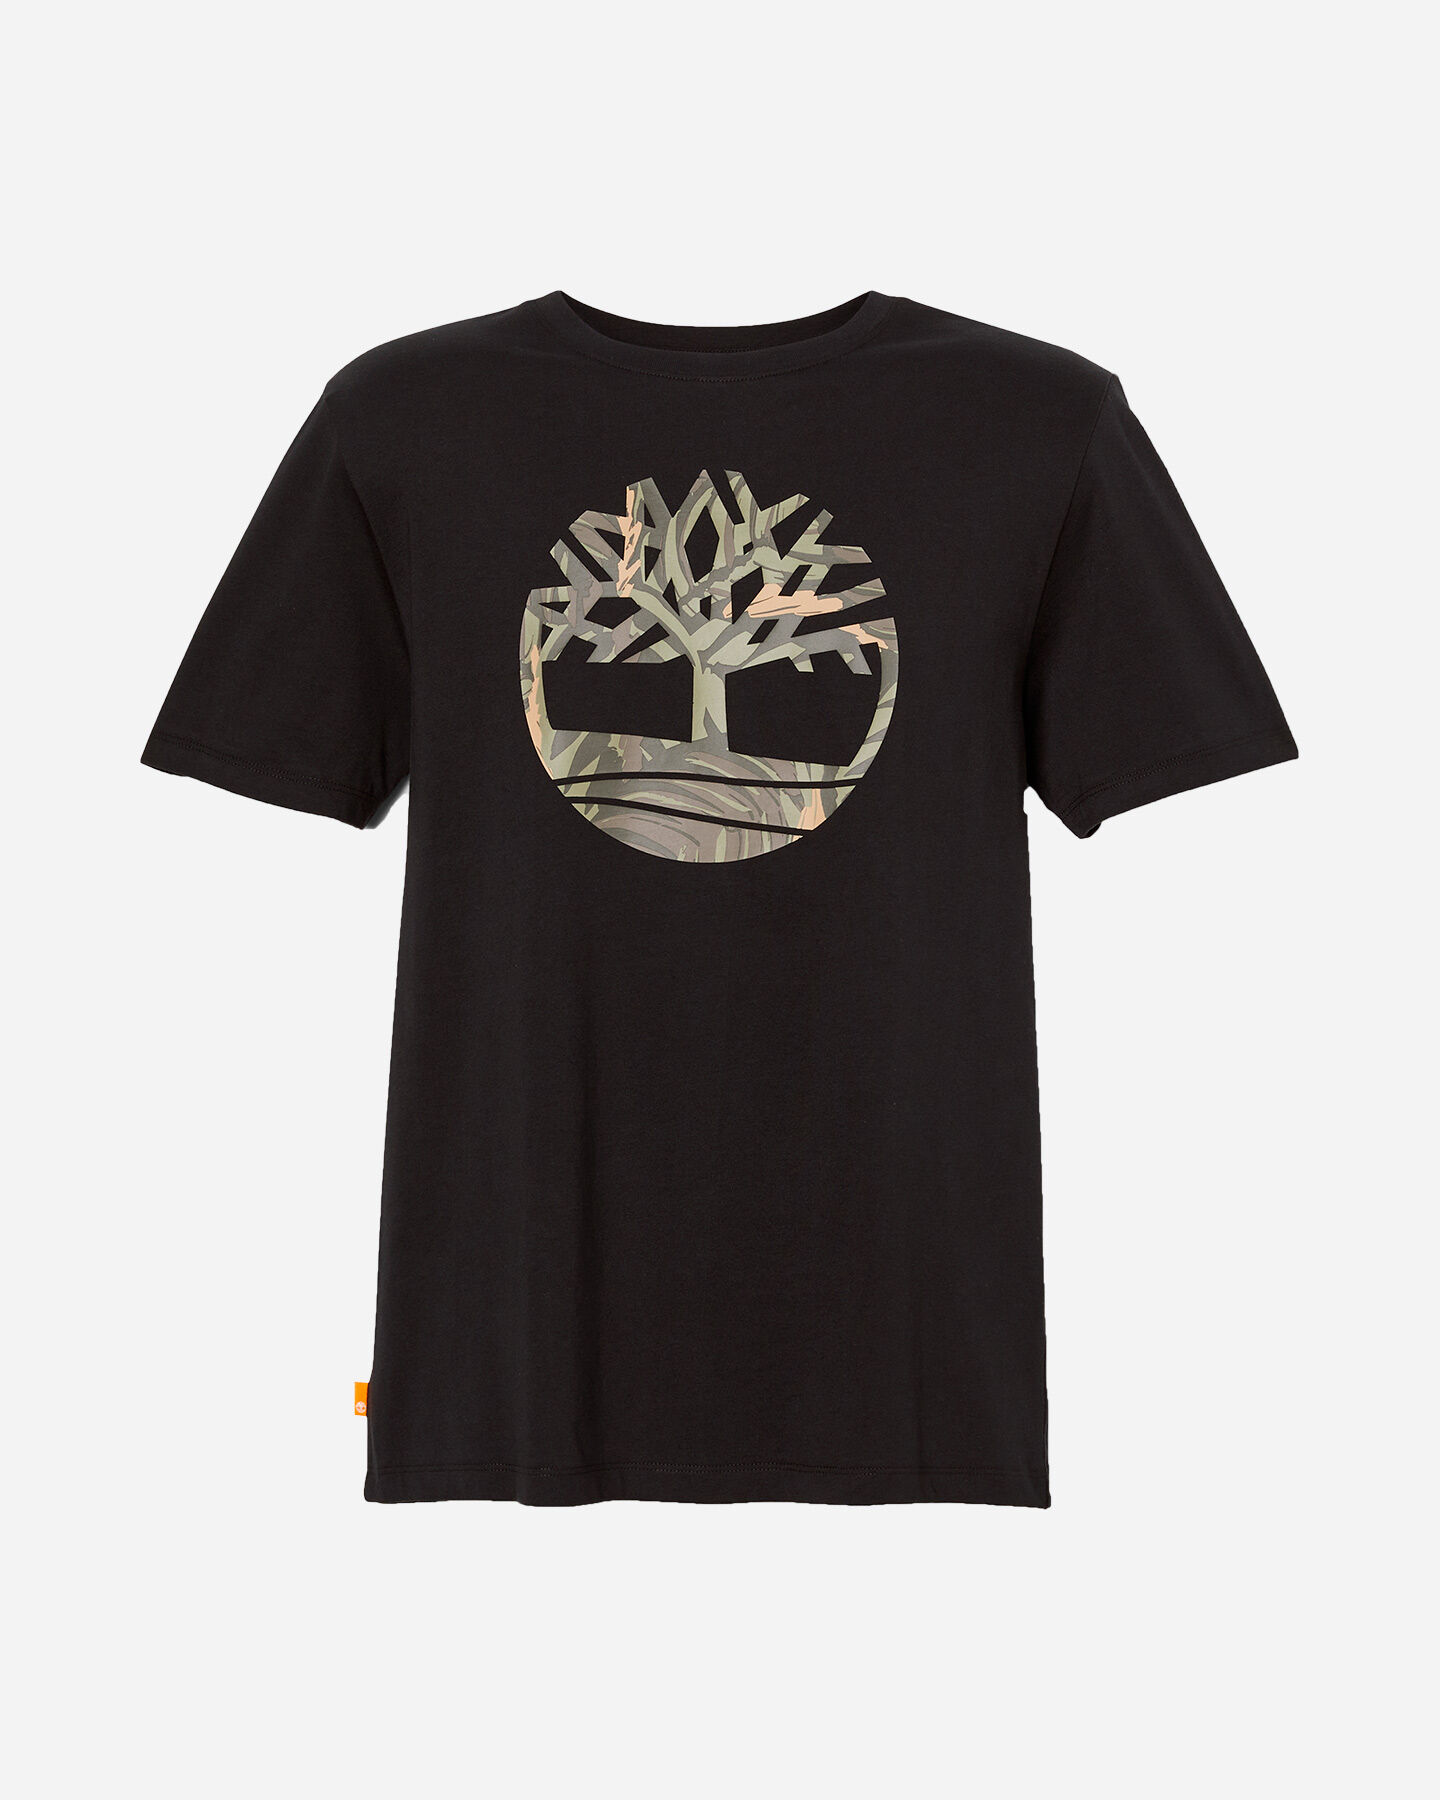  T-Shirt TIMBERLAND CAMO TREE M S4122616|0011|S scatto 0